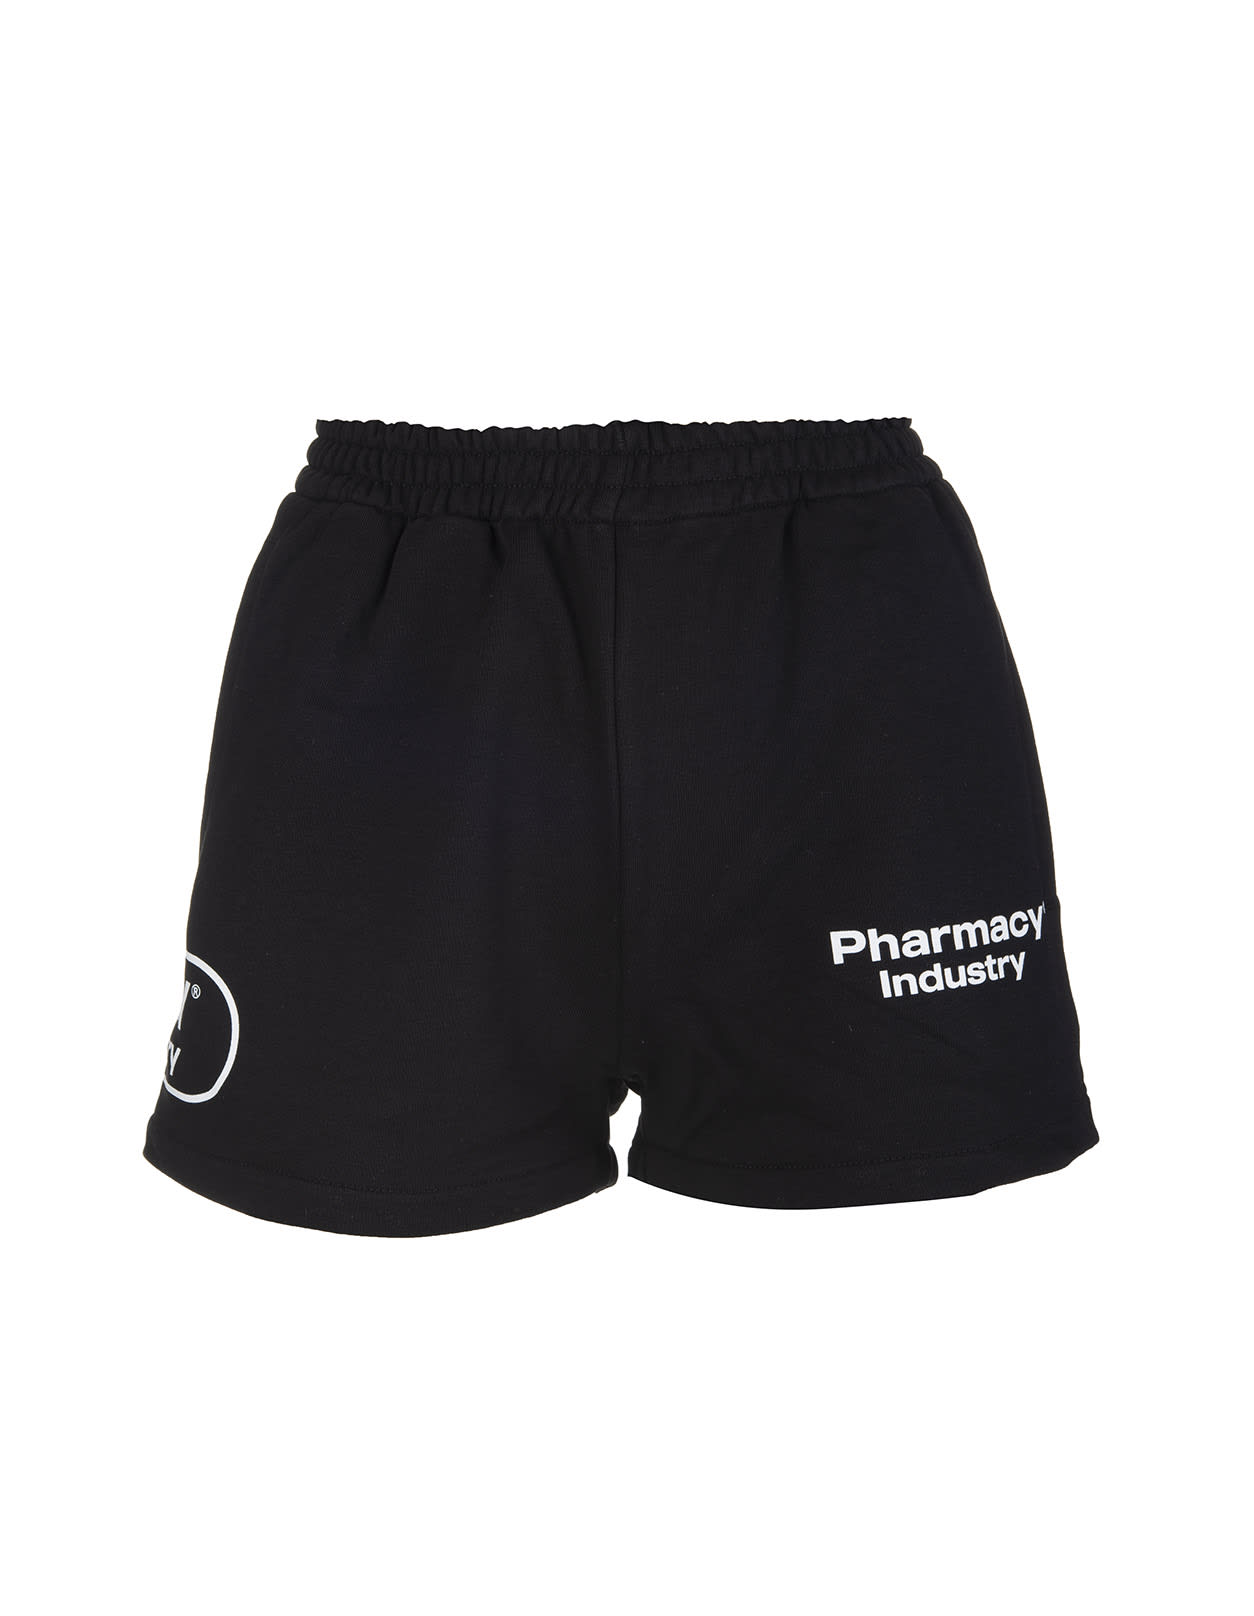 Pharmacy Industry Woman Black Shorts With Logos